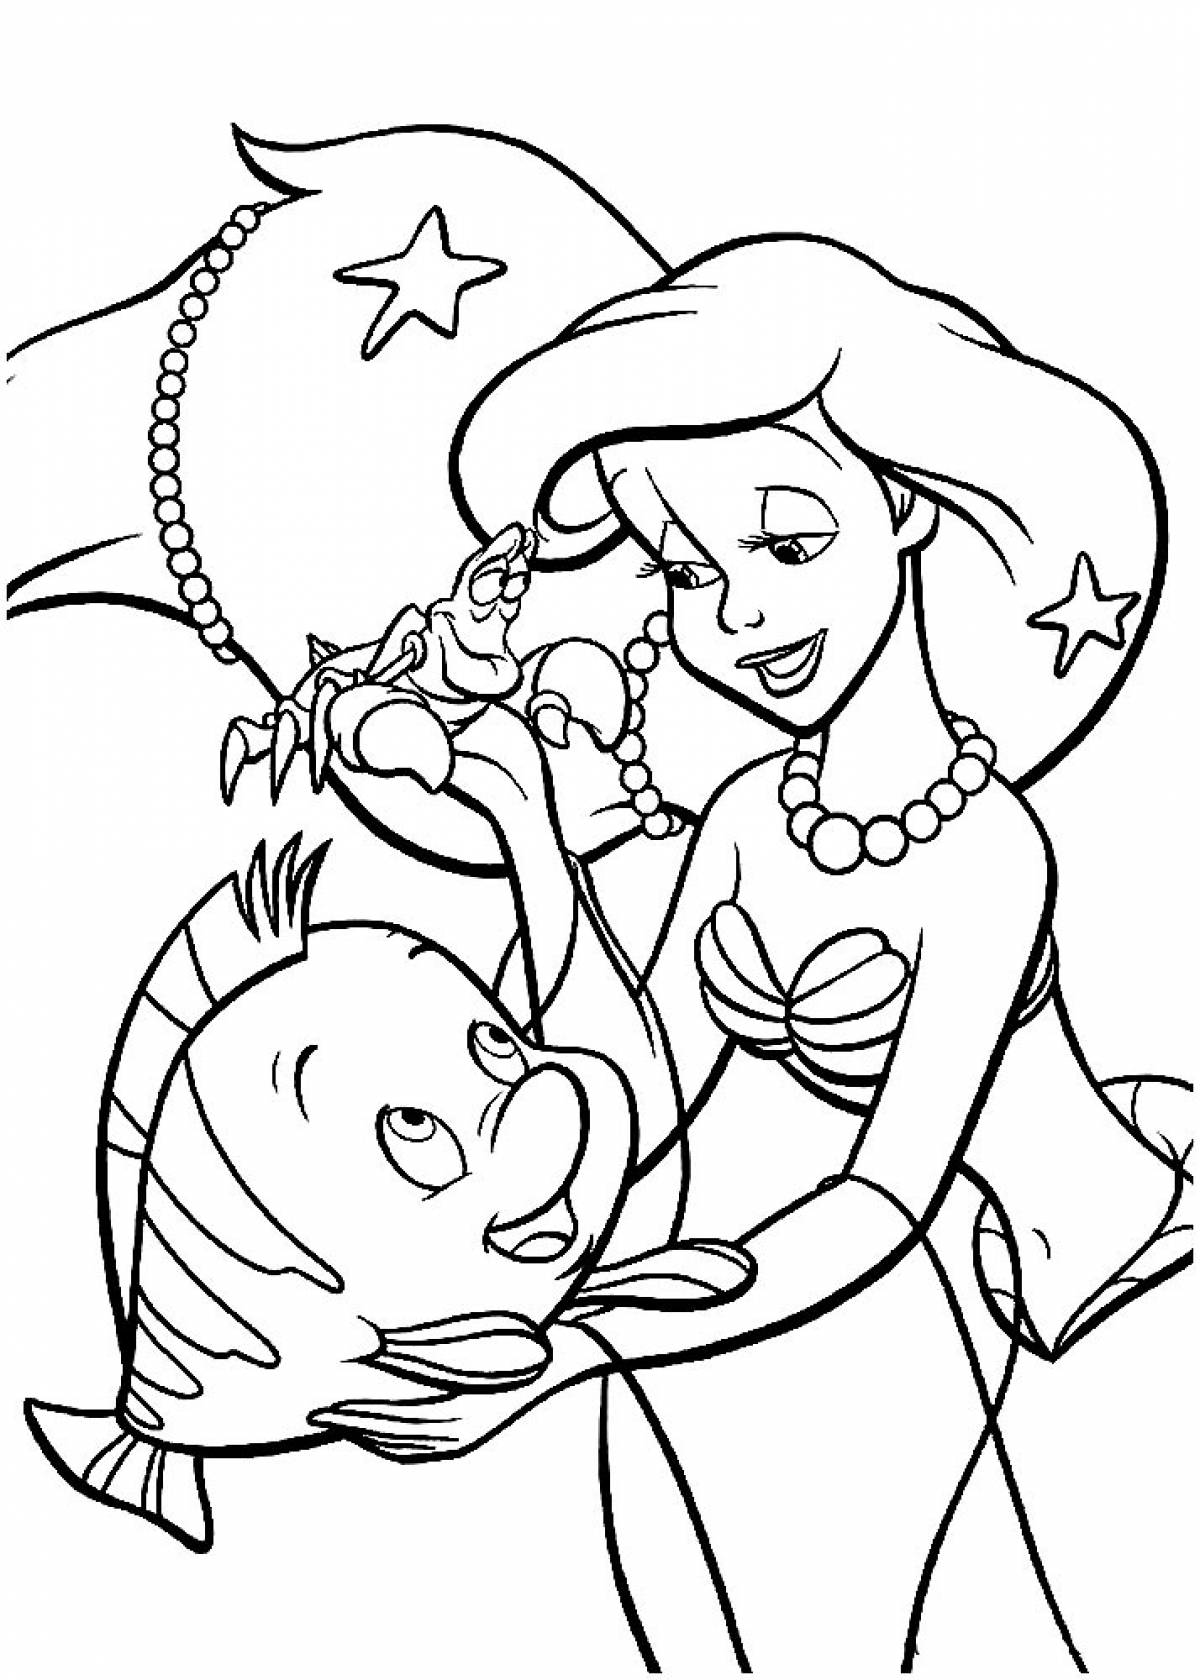 Little Mermaid coloring page for girls